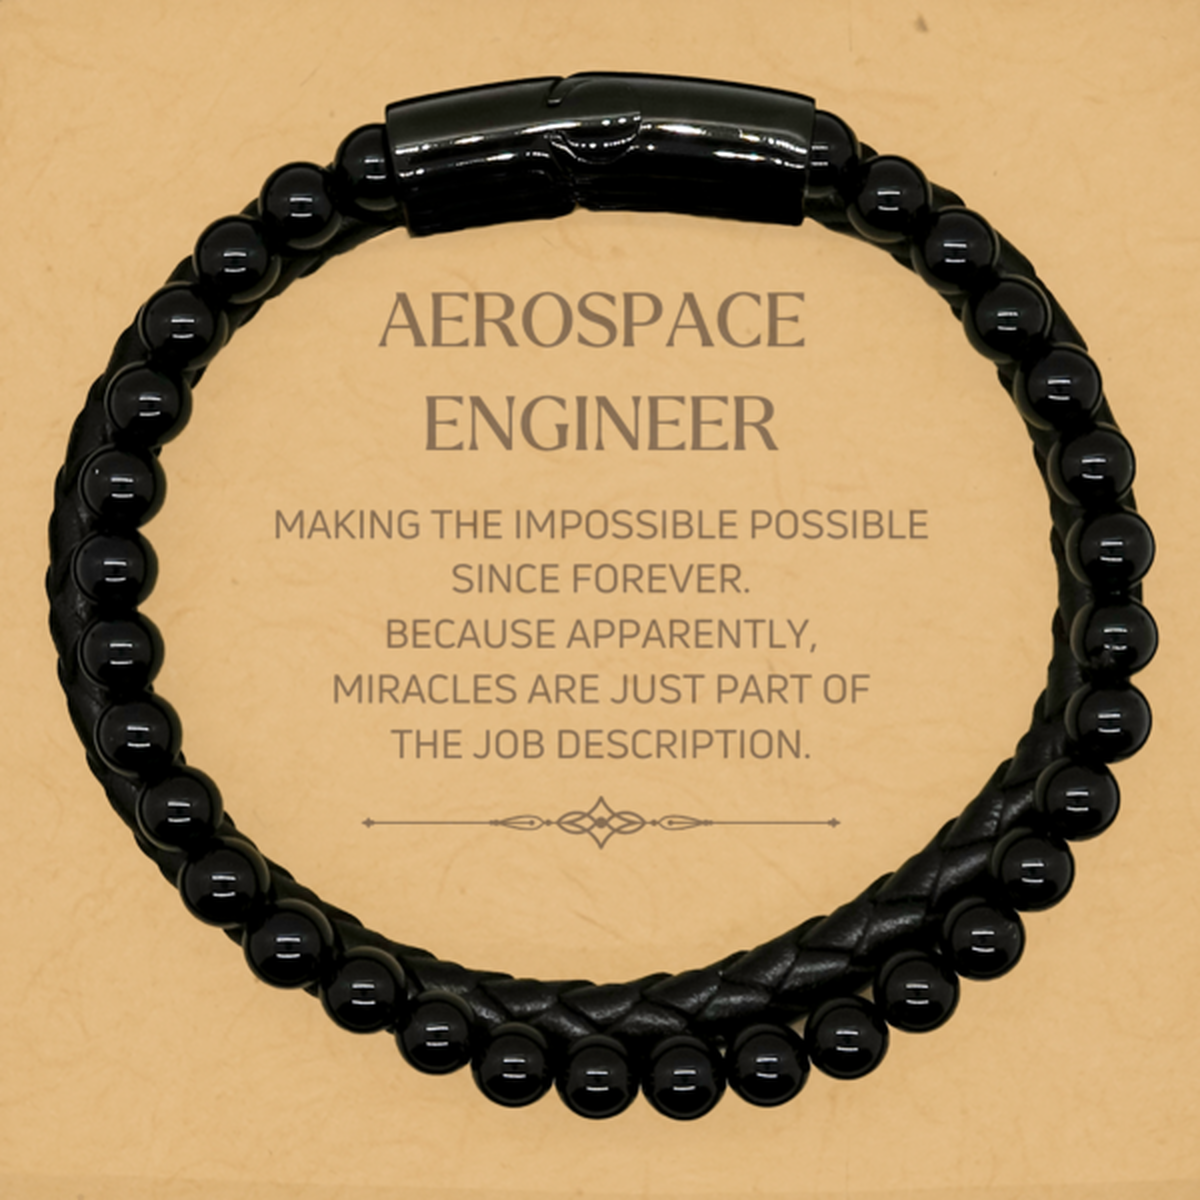 Funny Aerospace Engineer Gifts, Miracles are just part of the job description, Inspirational Birthday Stone Leather Bracelets For Aerospace Engineer, Men, Women, Coworkers, Friends, Boss